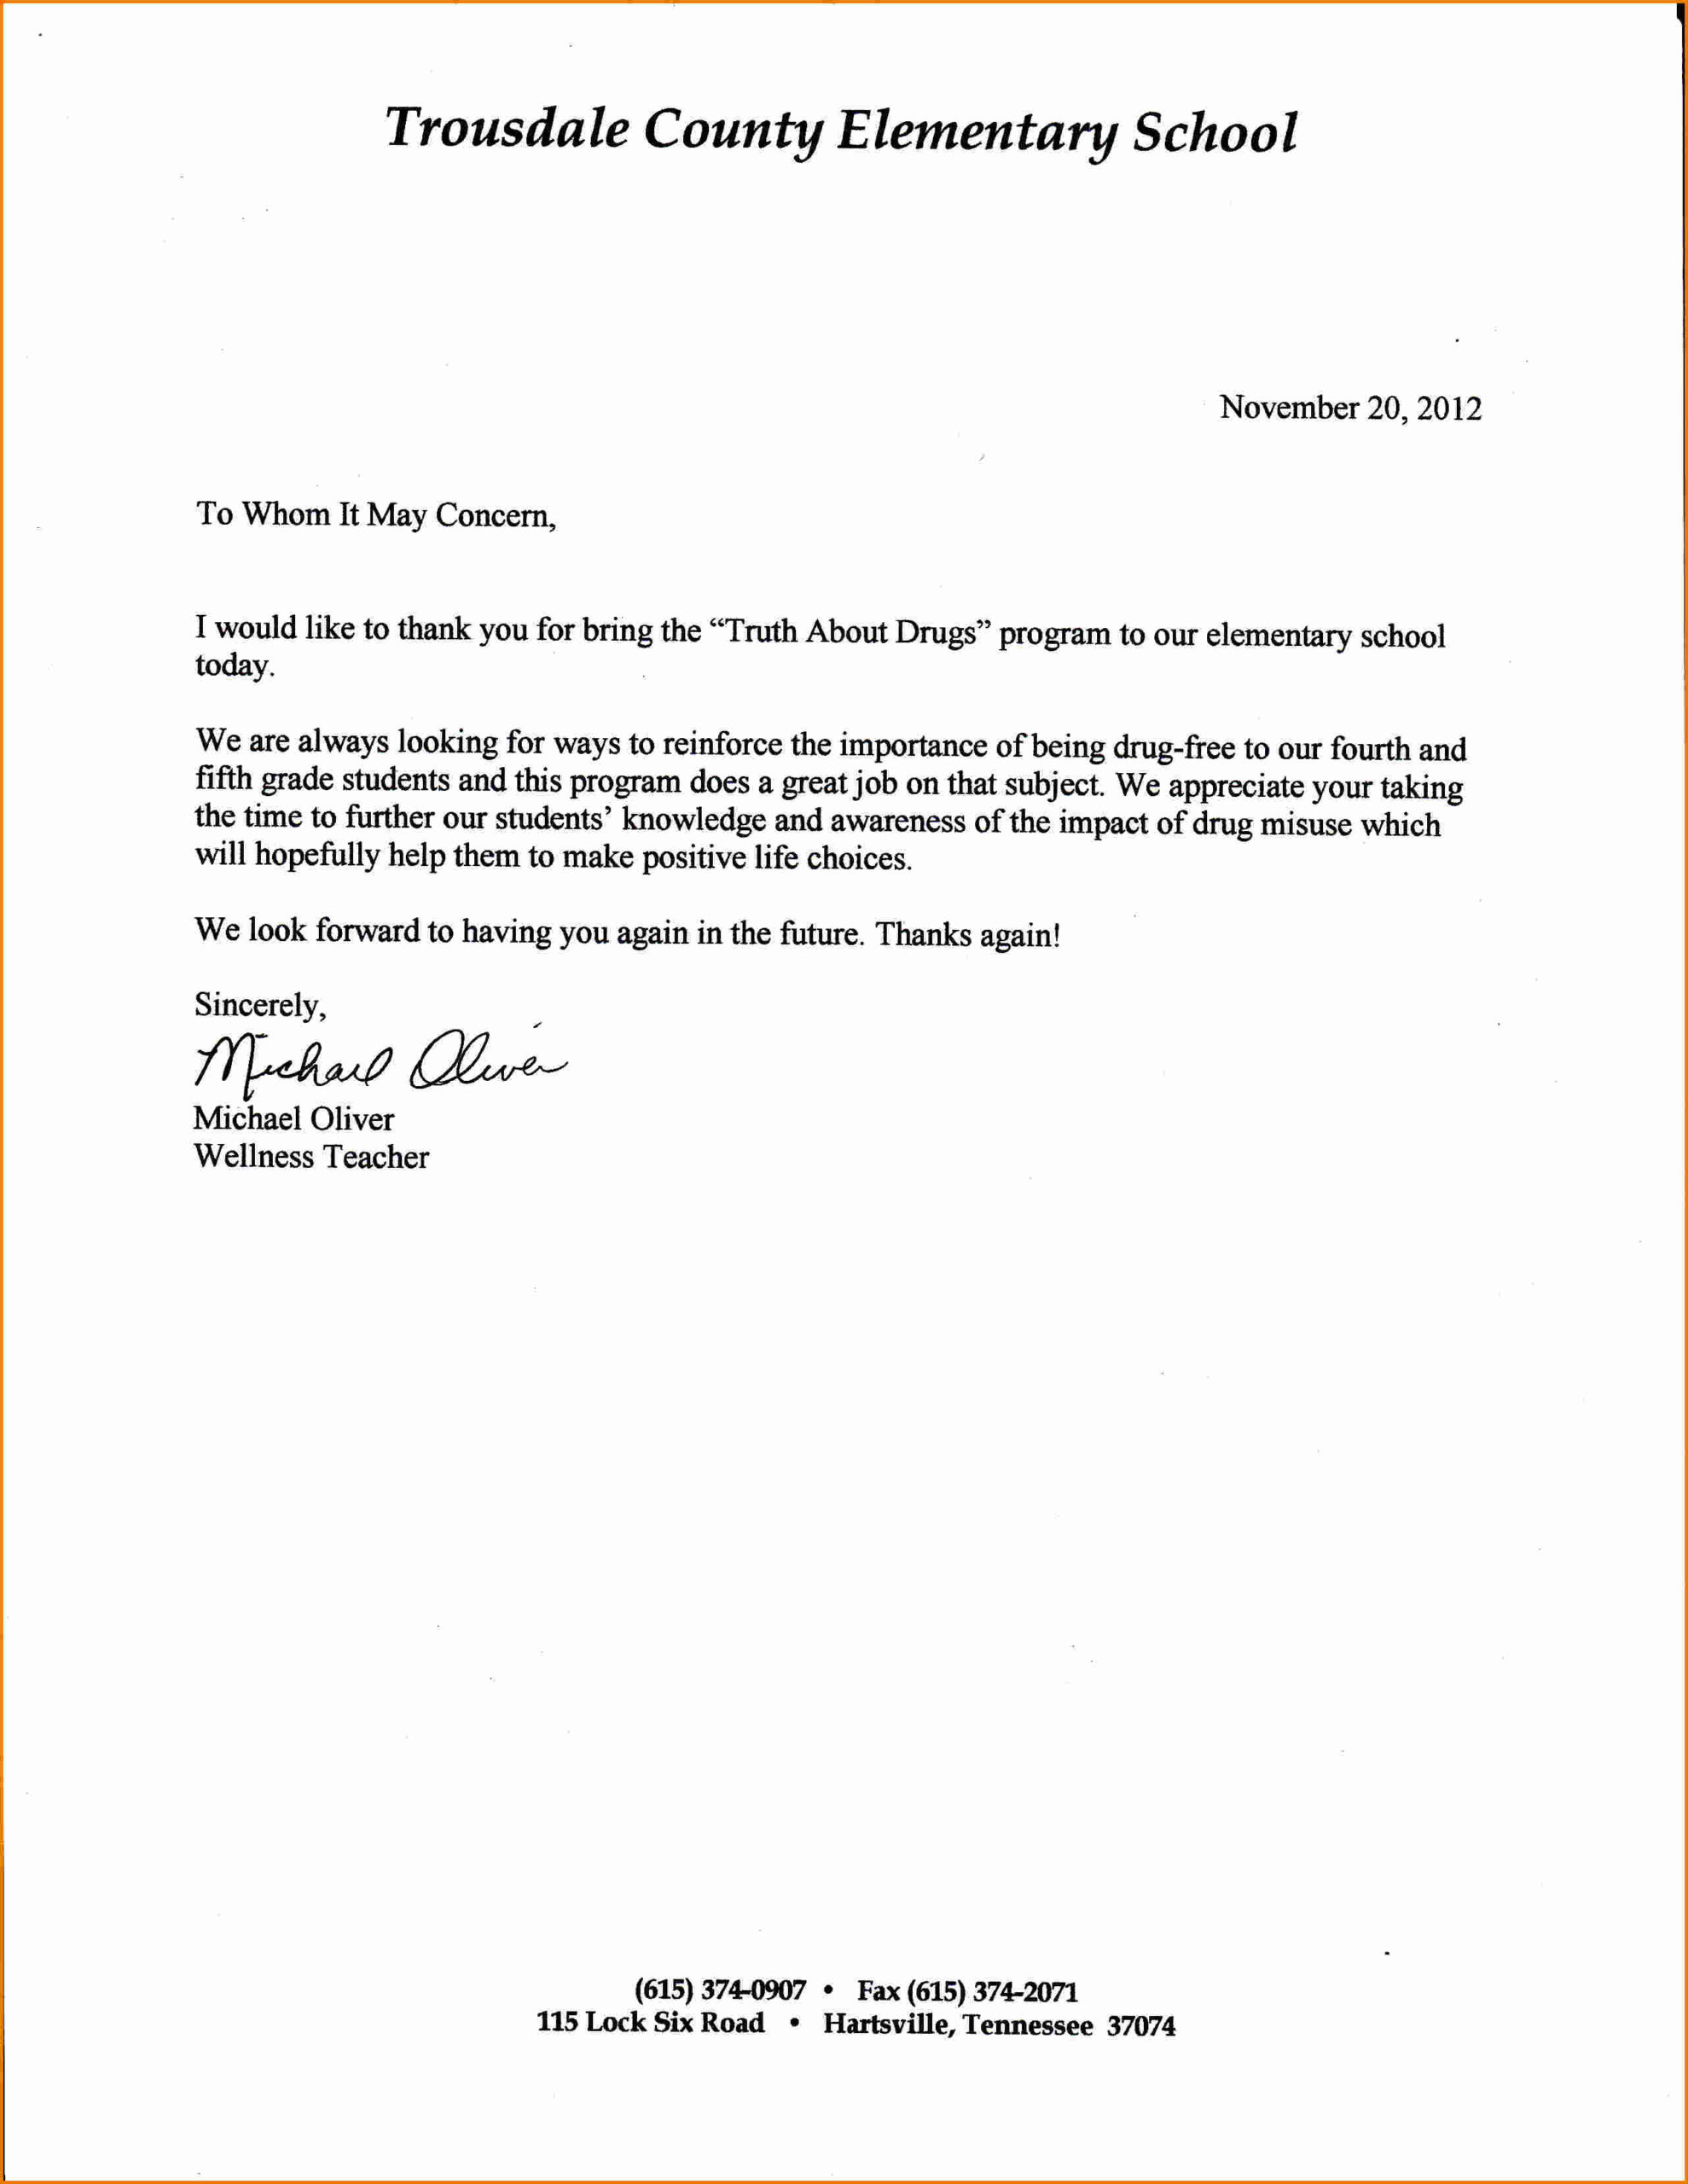 Recommendation Letter | Templates Free Printable intended for Letter Of Recommendation Request Template